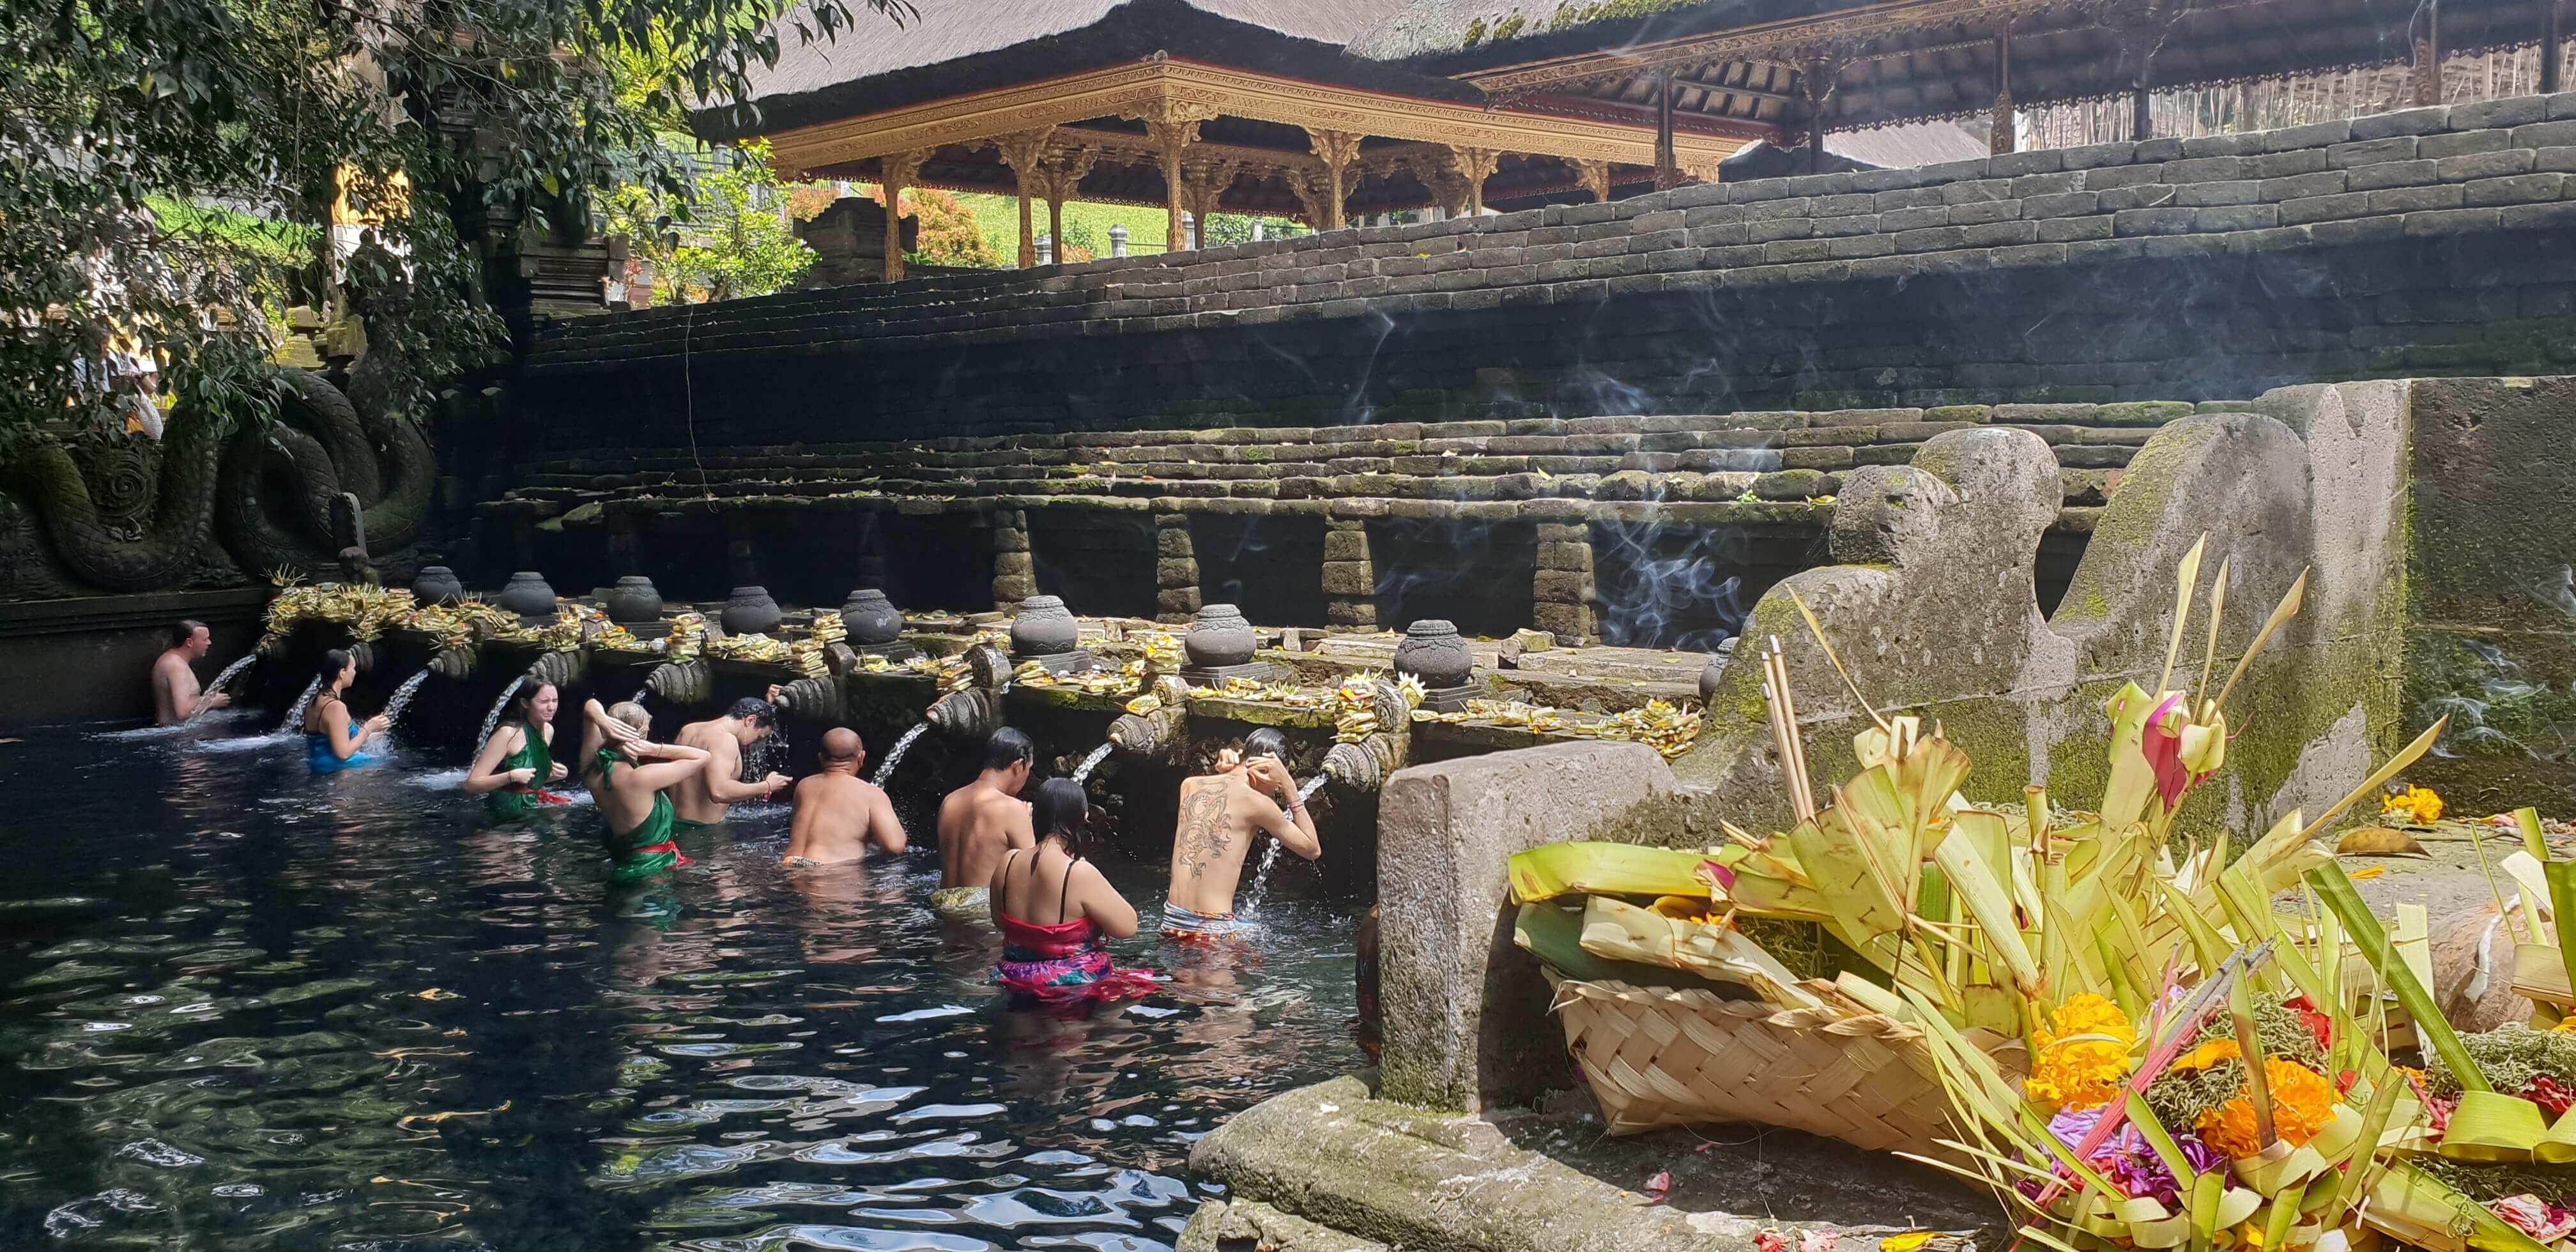 Taking a dip in holy water of Tirta Empul Water Temple is a must-do for people wanting to experience the culture of Bali